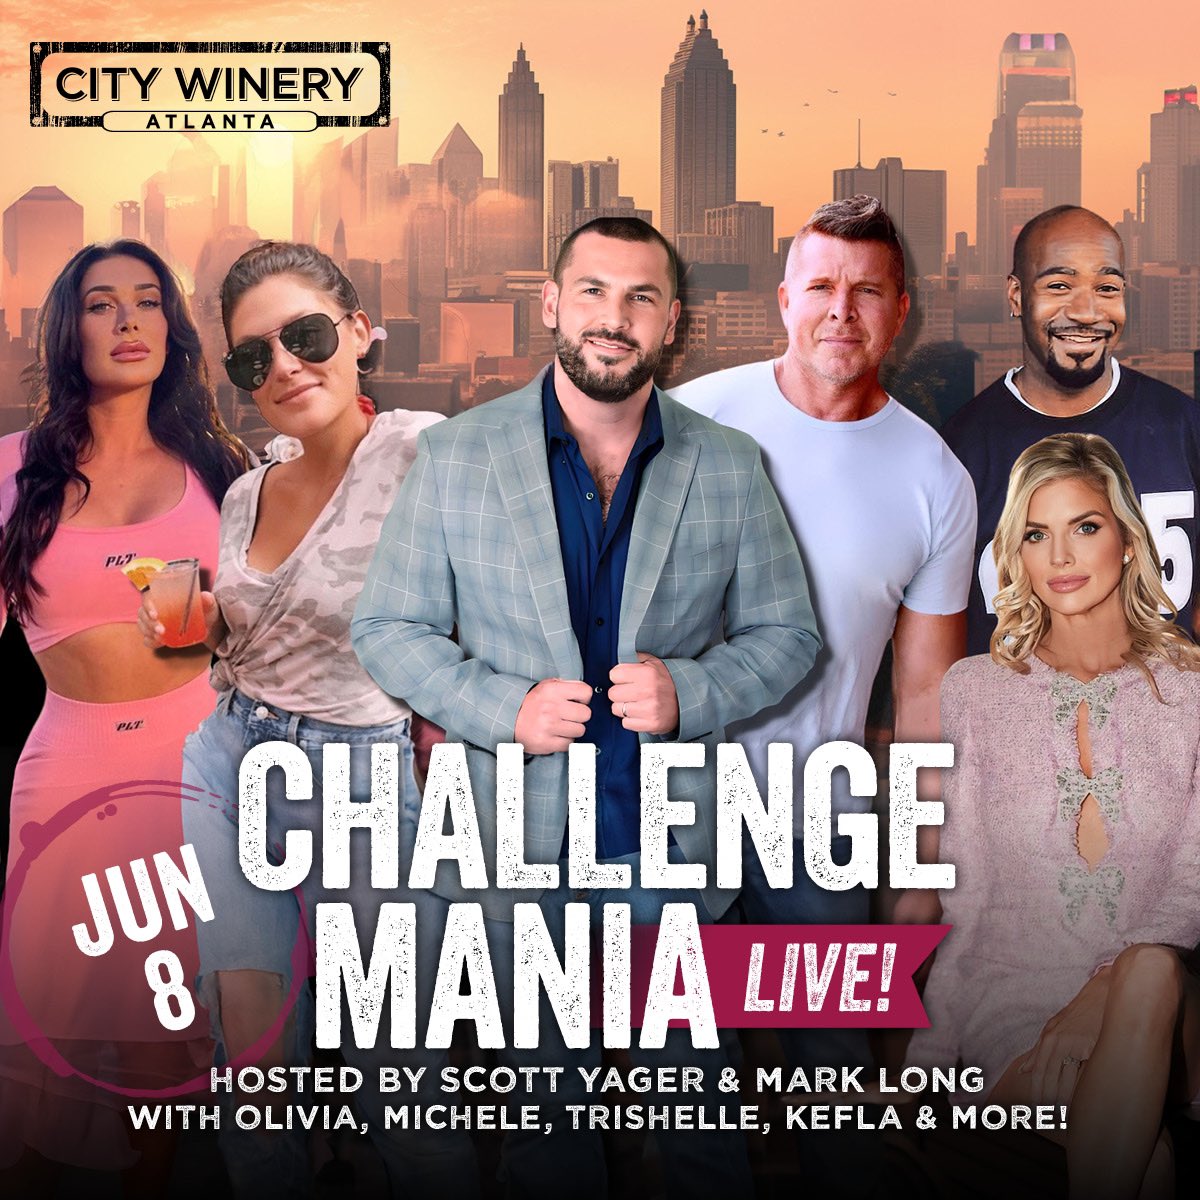 🚨LOW VIP TICKET COUNT FOR ATLANTA! Once these are all gone, Meet N Greet is closed out! #ChallengeMania #TheChallenge